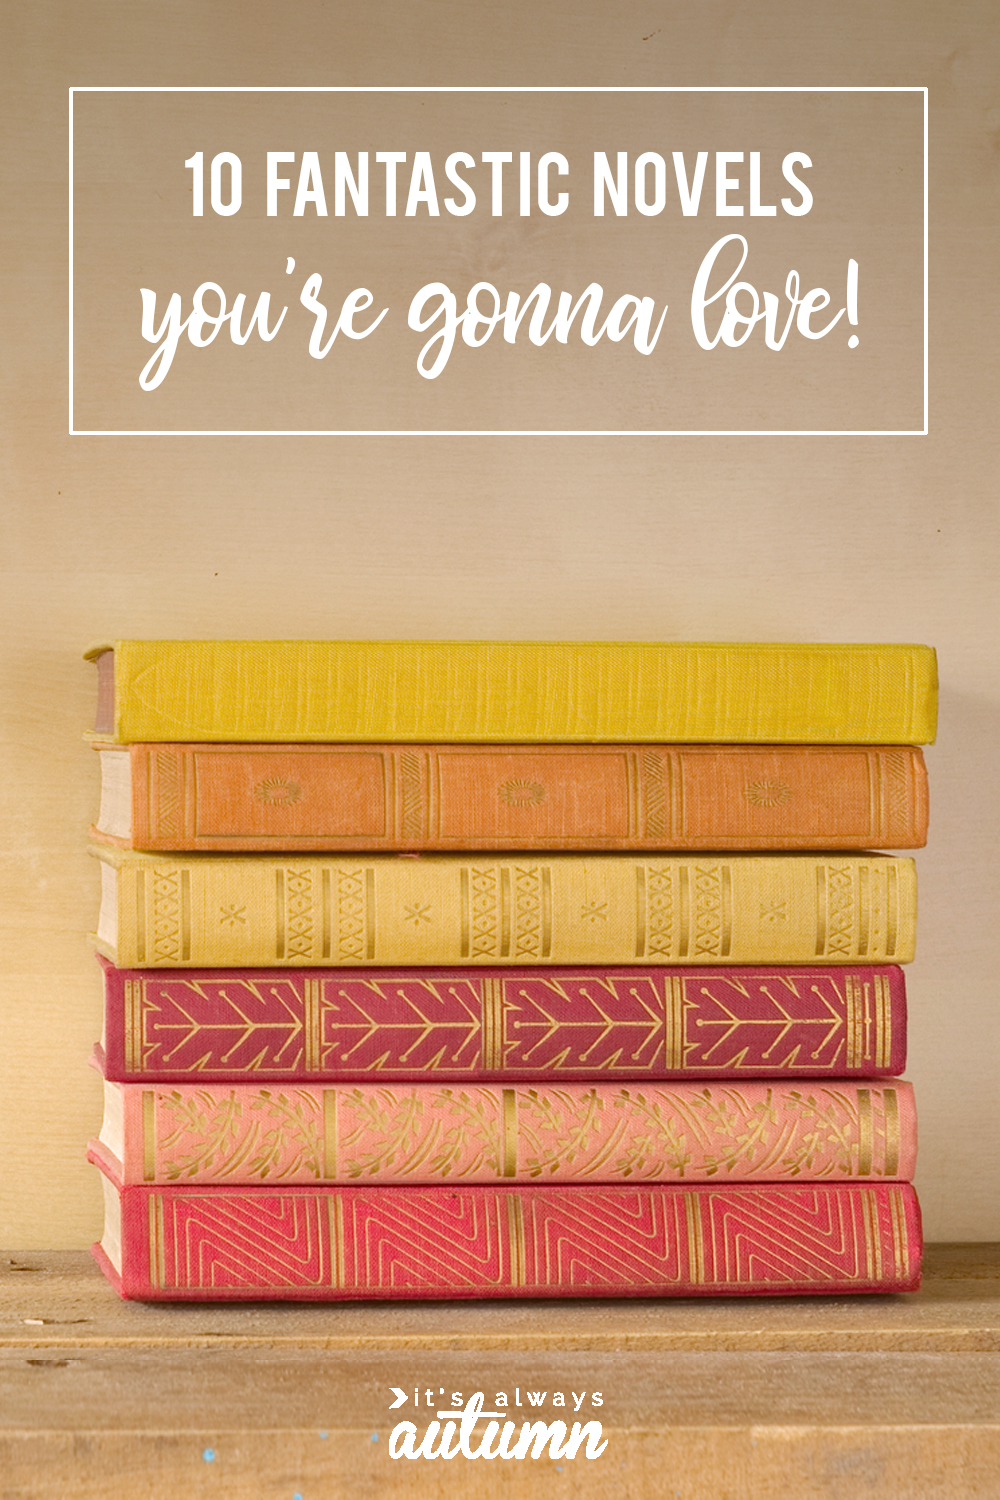 10 novels you're gonna love! Another fantastic book list.